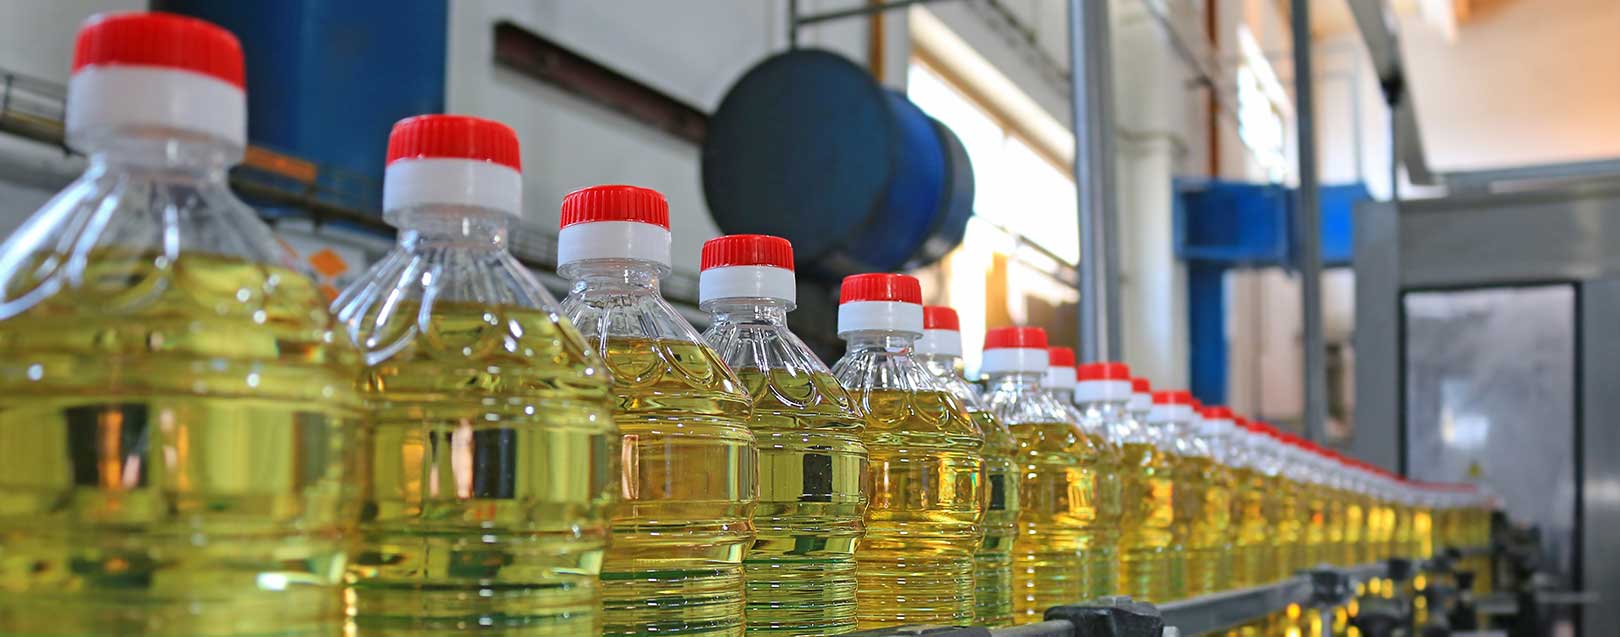 India lifts 9-year ban on bulk export of certain edible oils